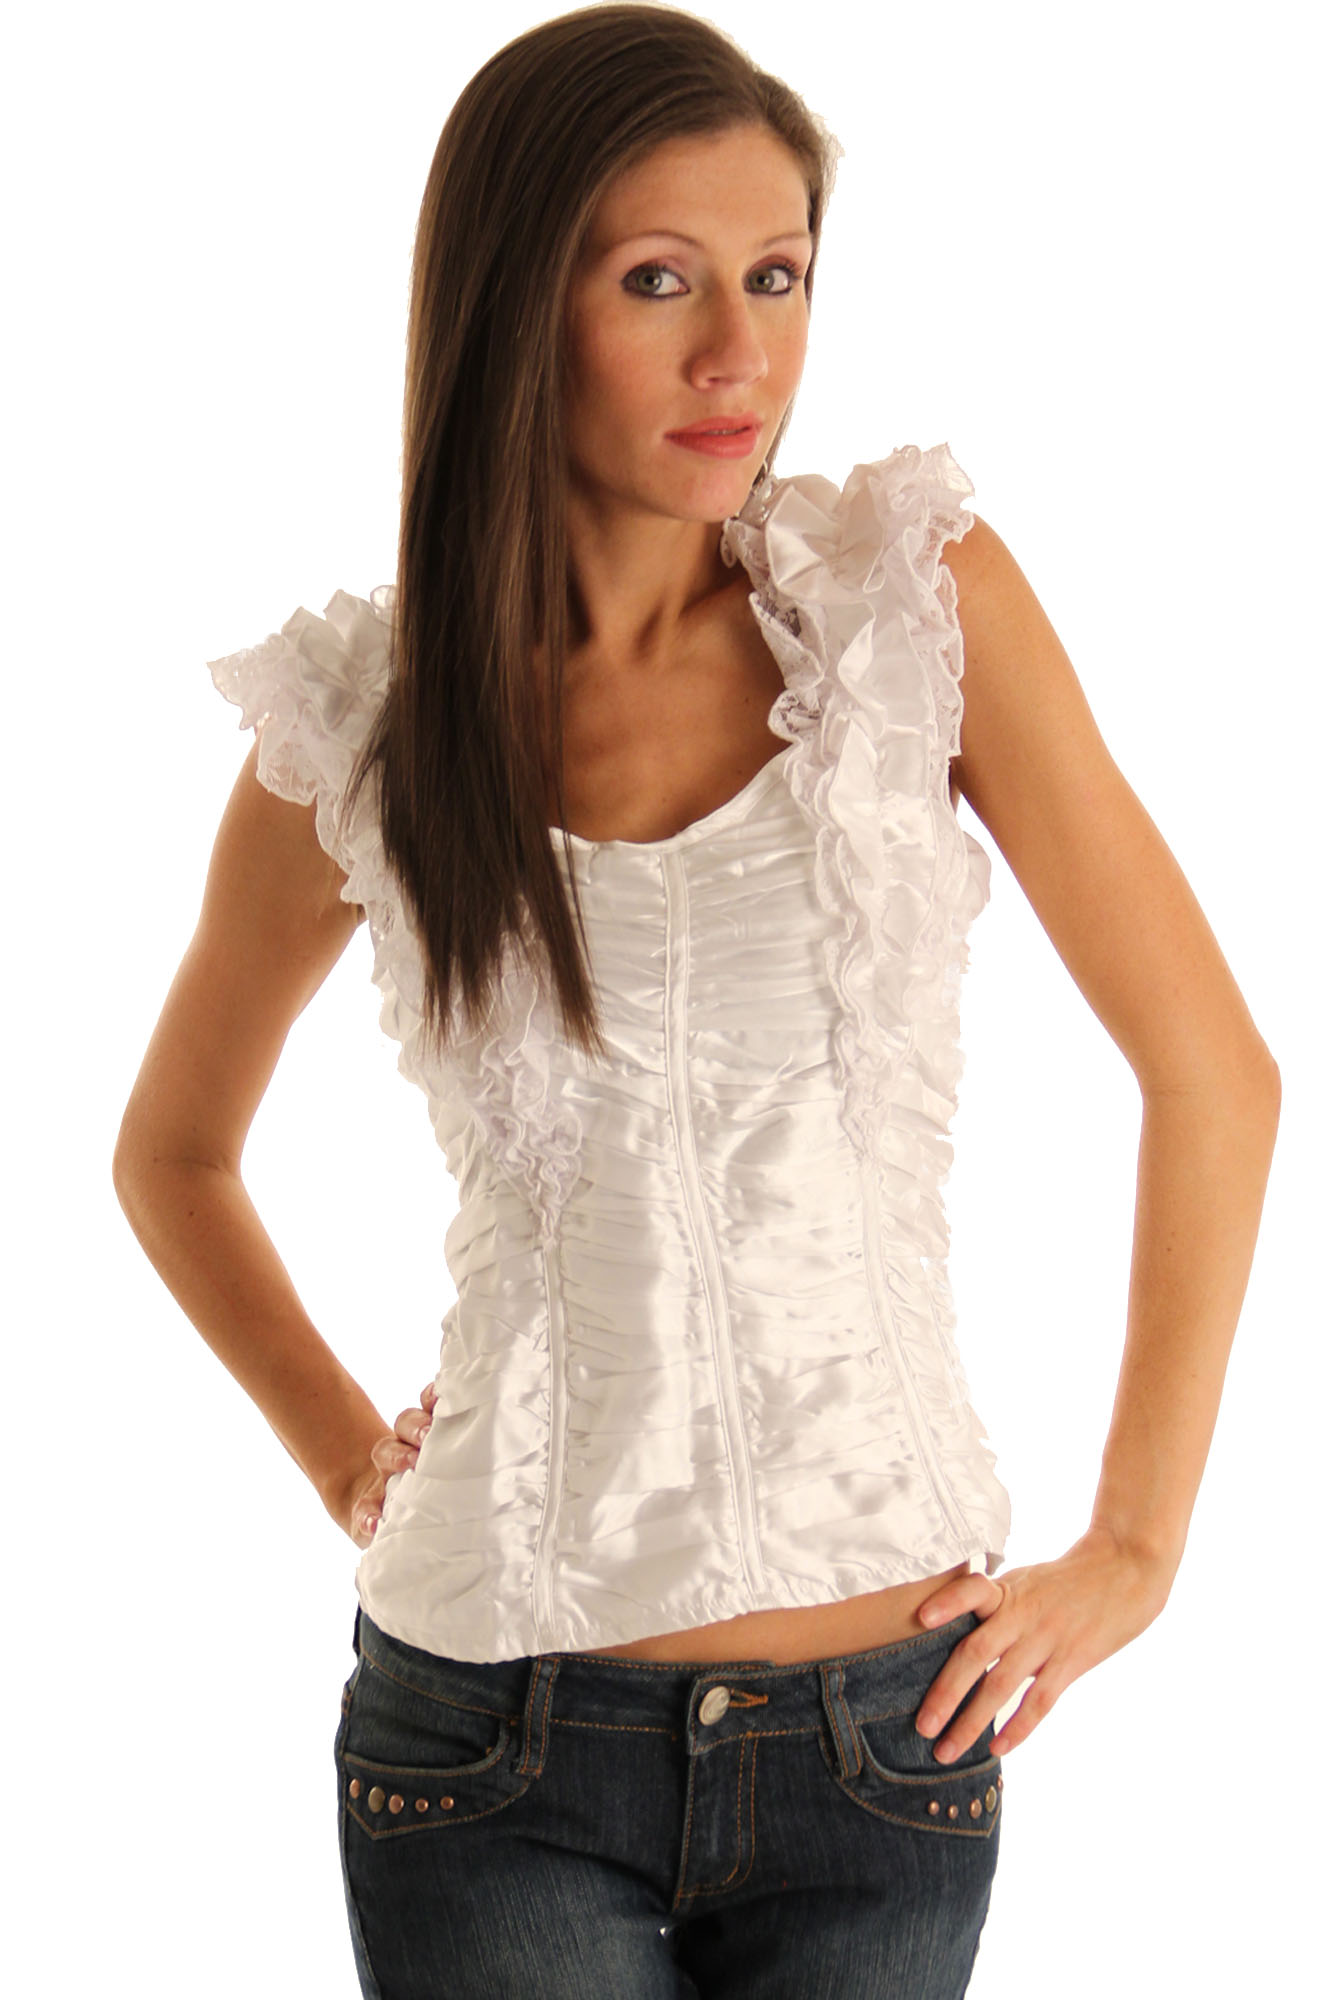 DHStyles.com DHStyles Women's White Romantic Ruffled Satin and Lace Top - Large